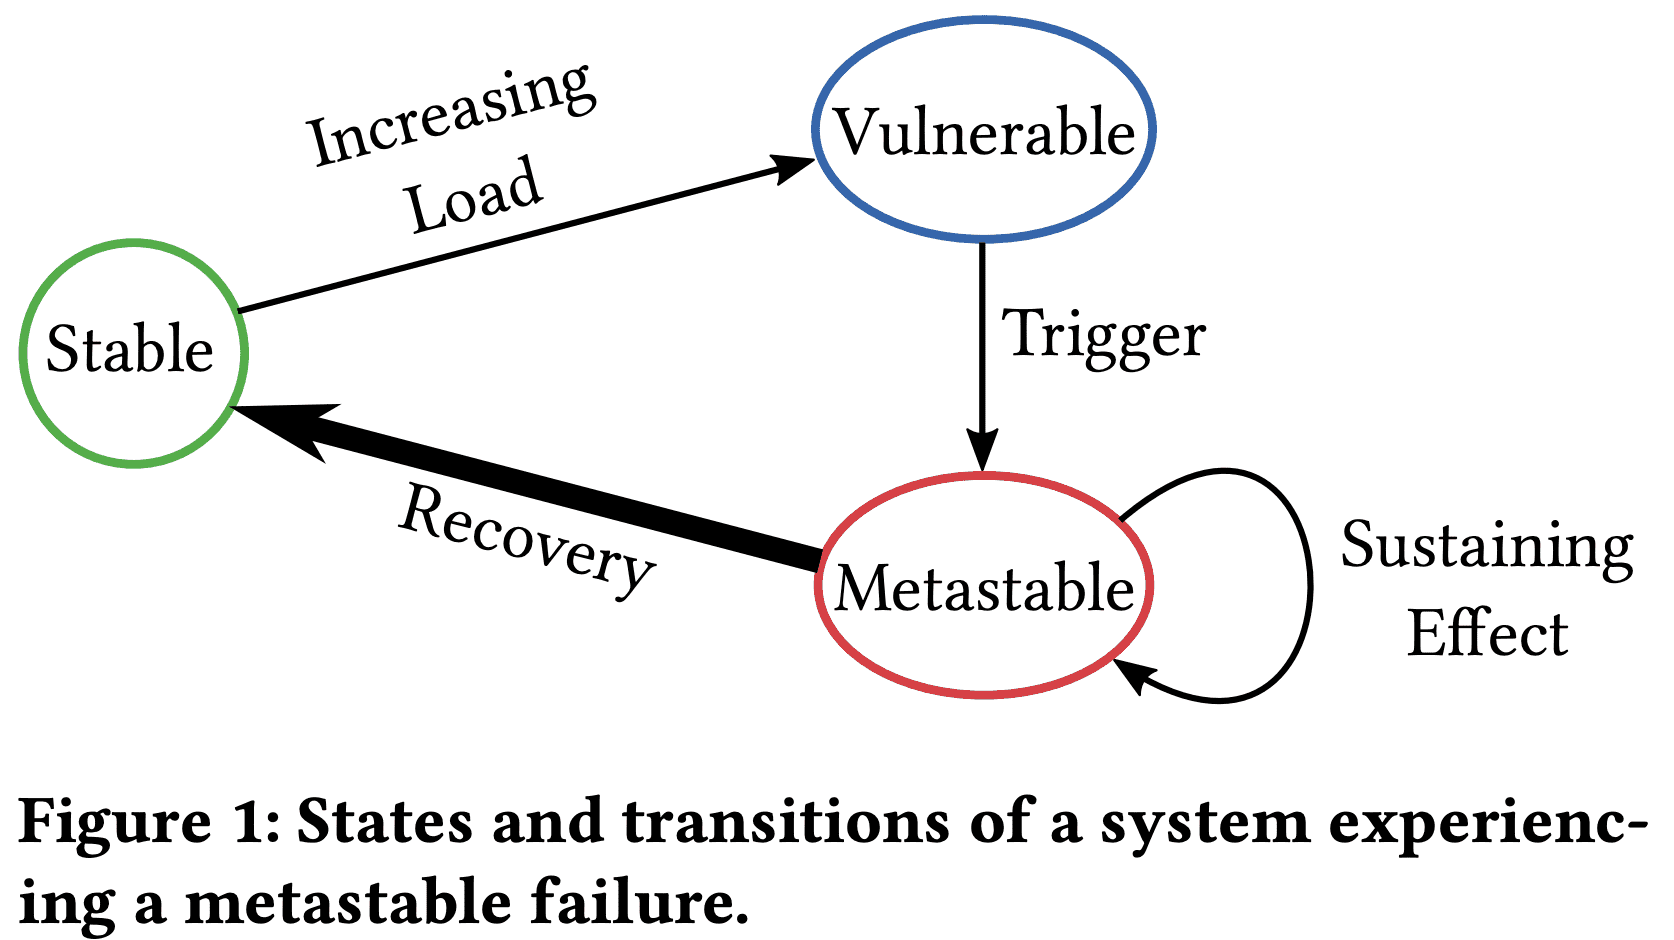 States and transitions of a system experiencing a metastable failure.